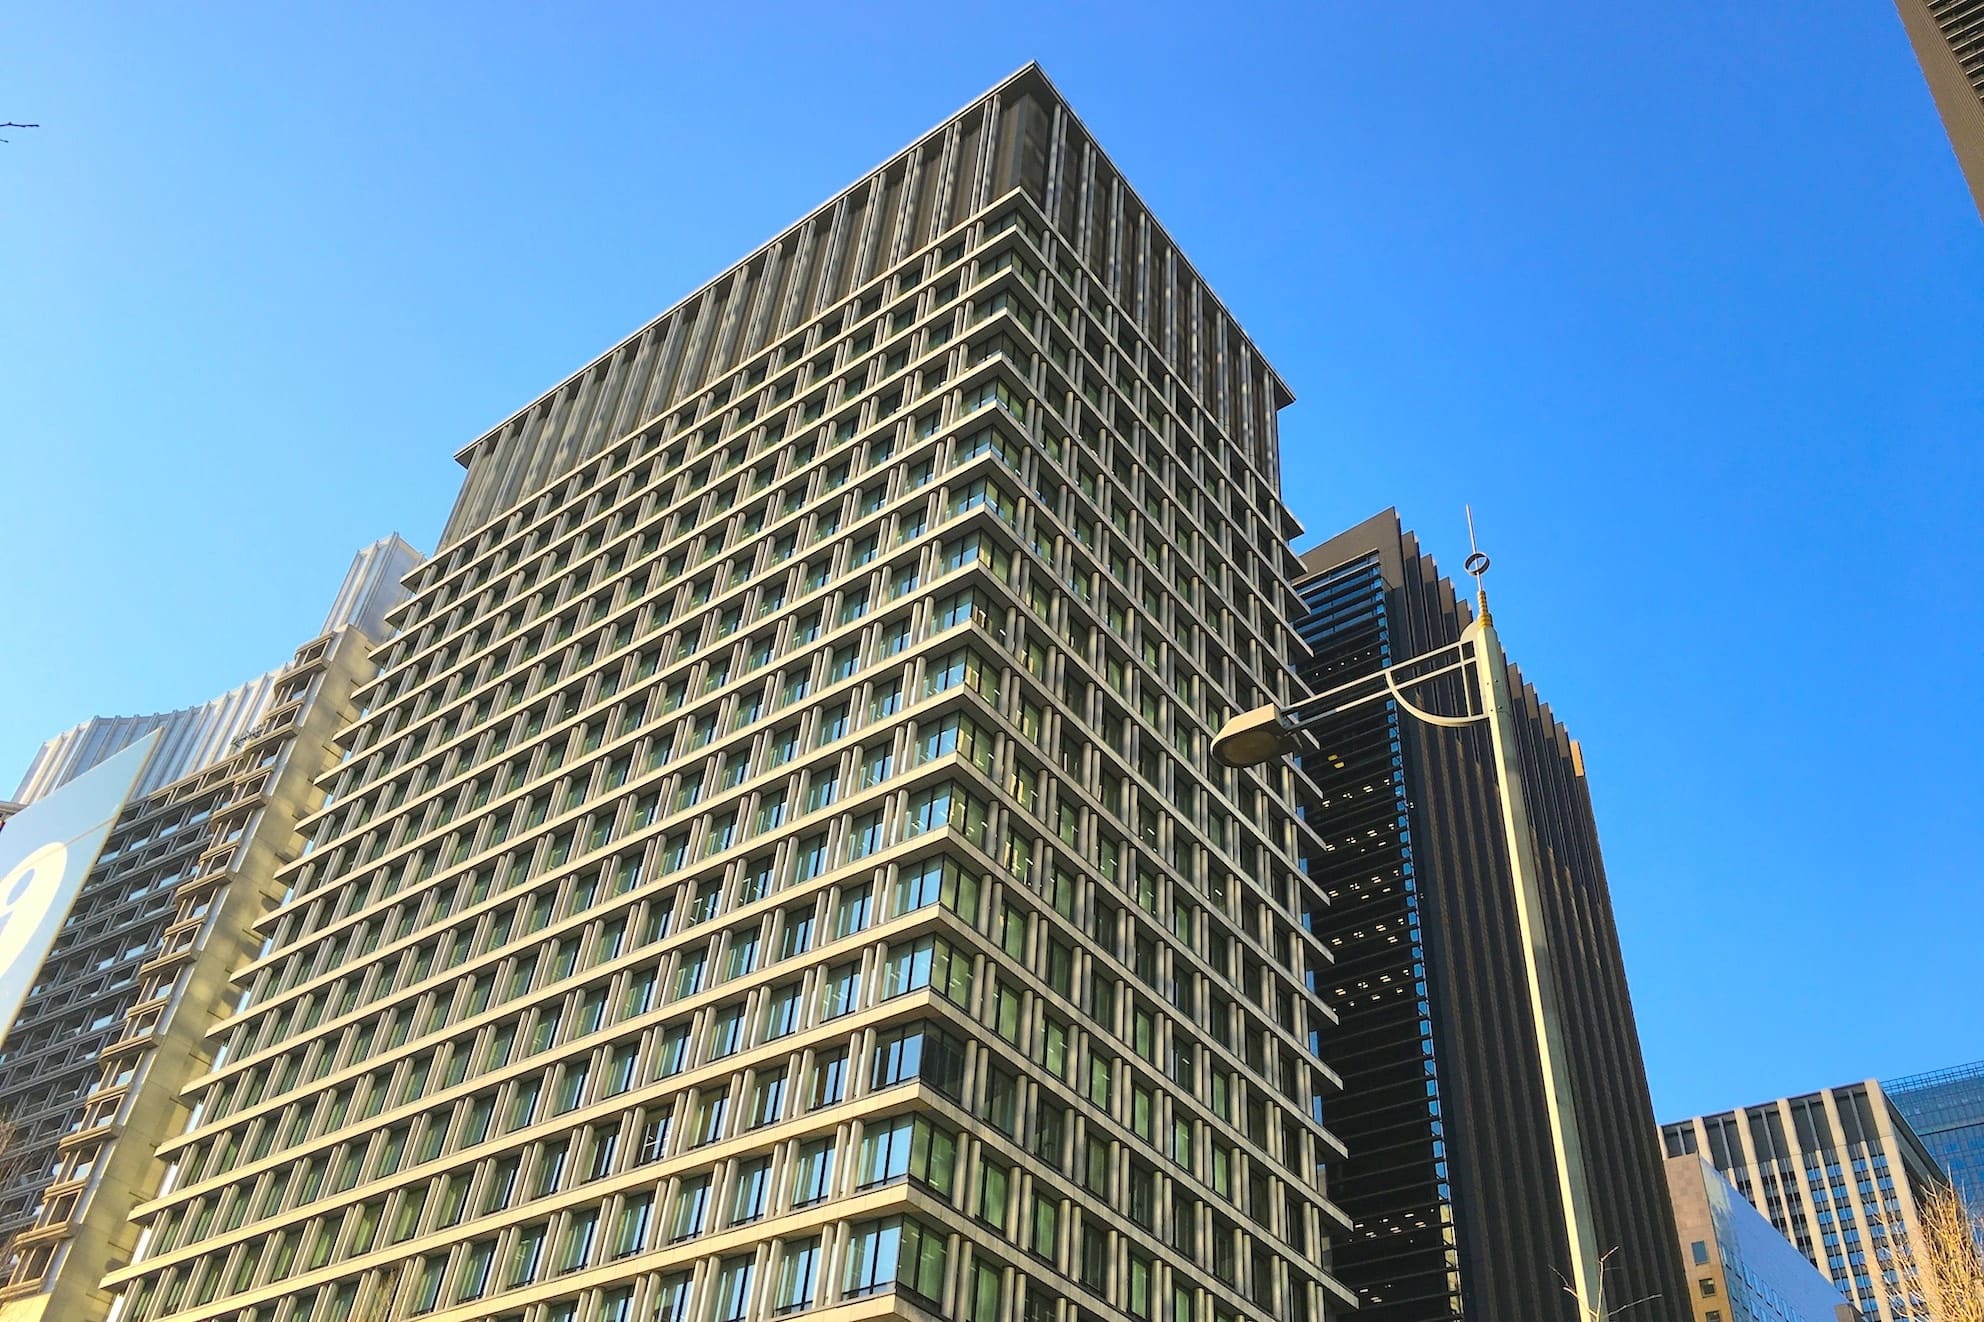 Exterior view from the ground. The building is a highly visible office building facing Hibiya Street.